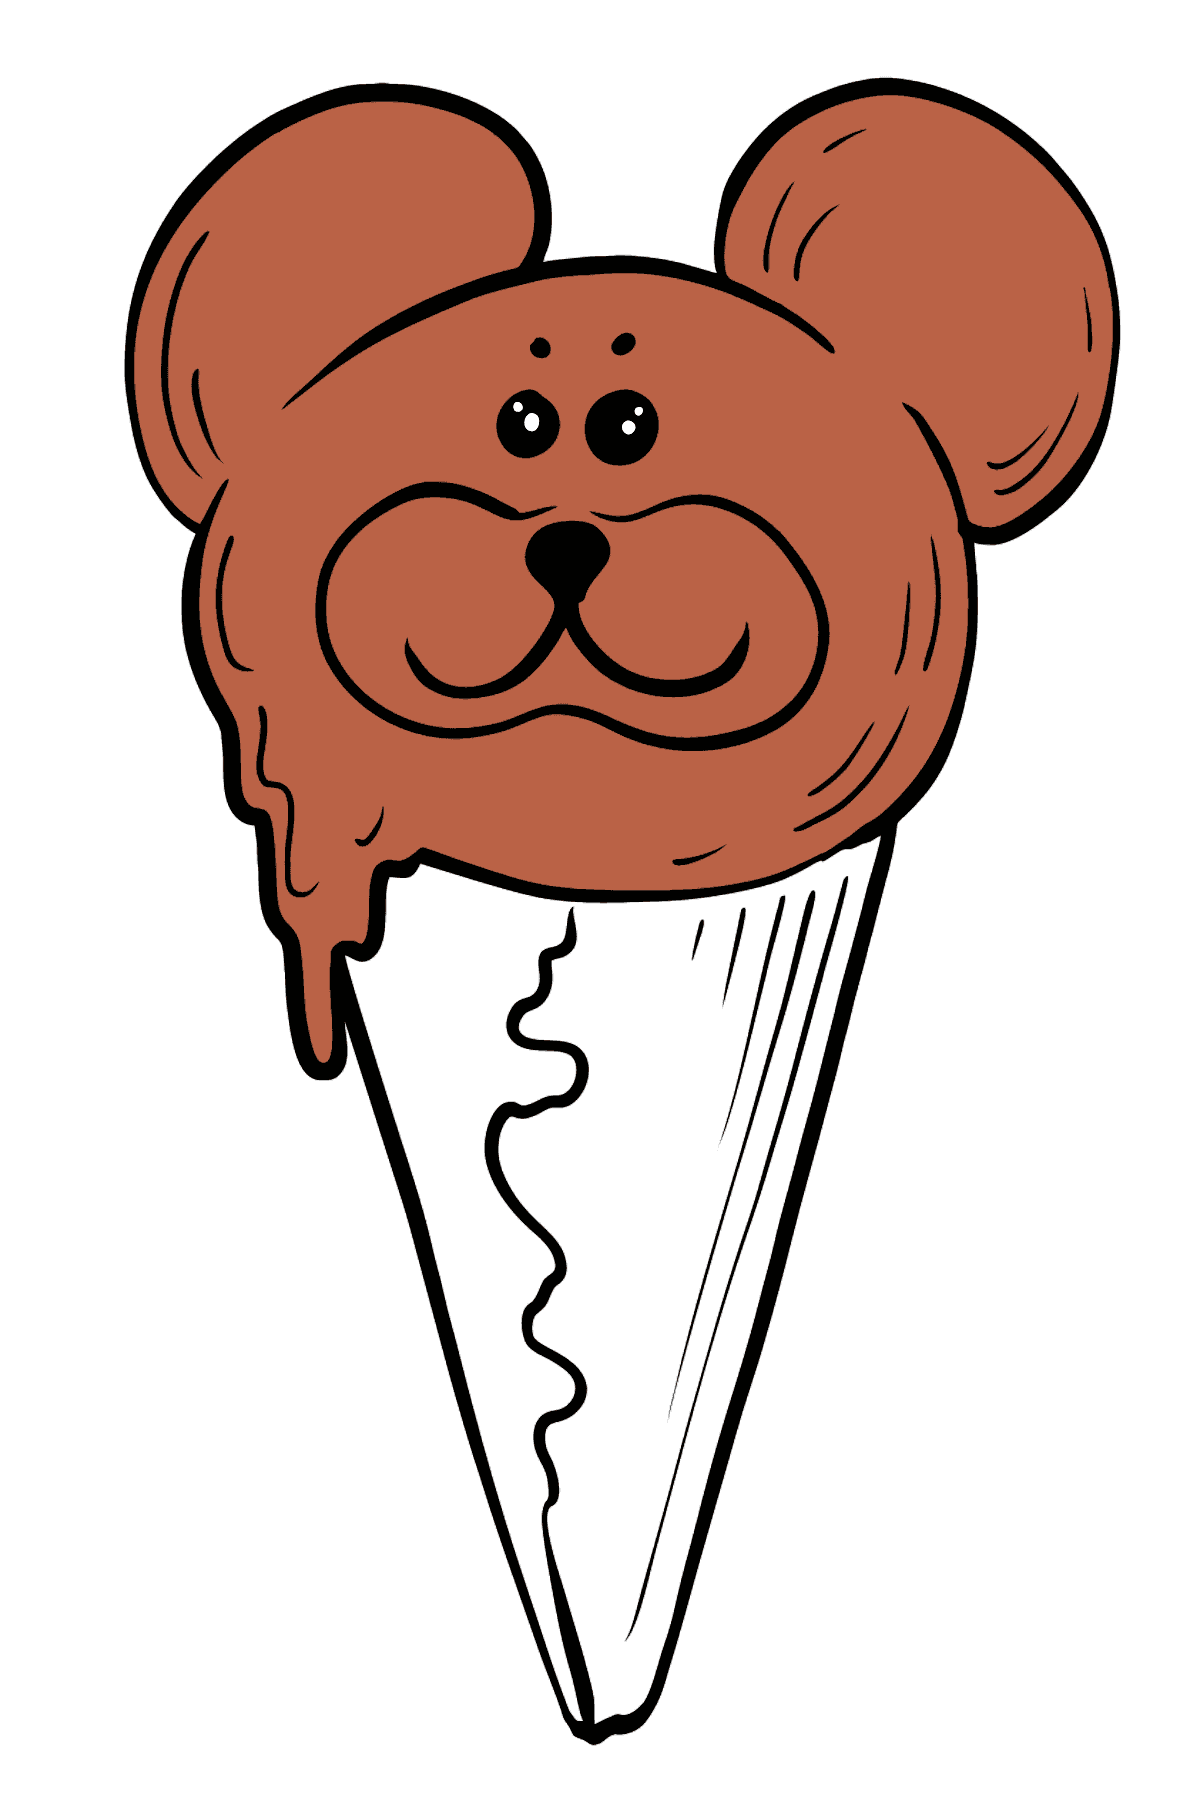 Ice Cream - Chocolate Bear with Eyes coloring page - Coloring Pages for Kids